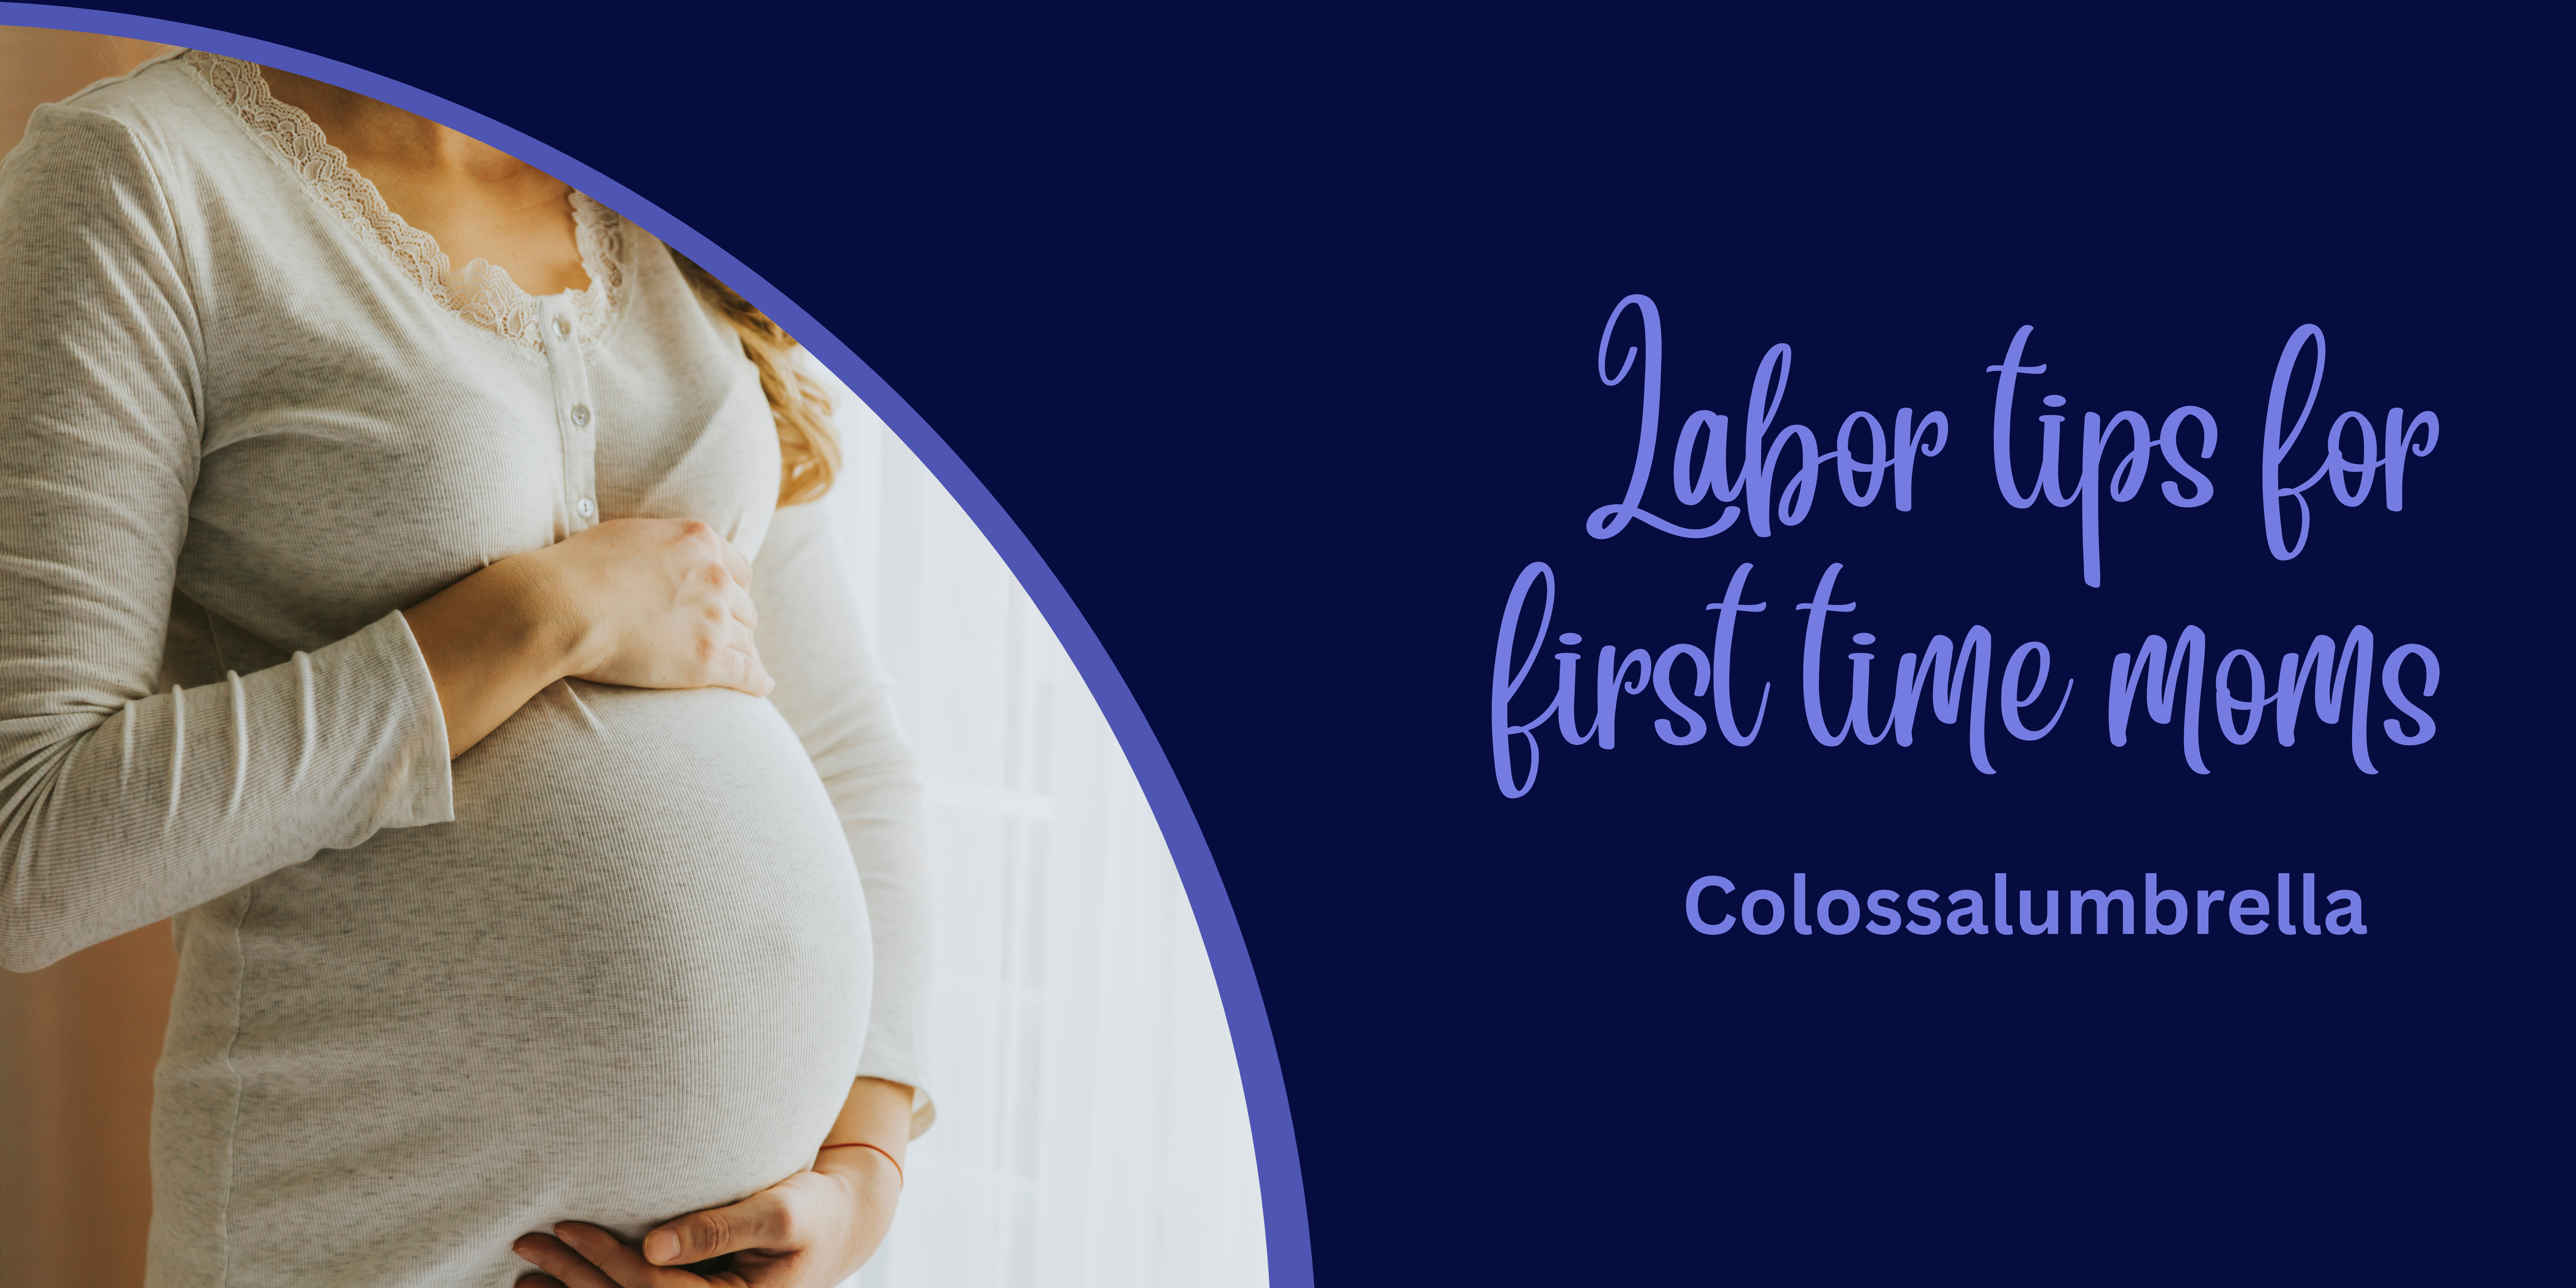 Labor tips for first time moms by Colossalumbrella